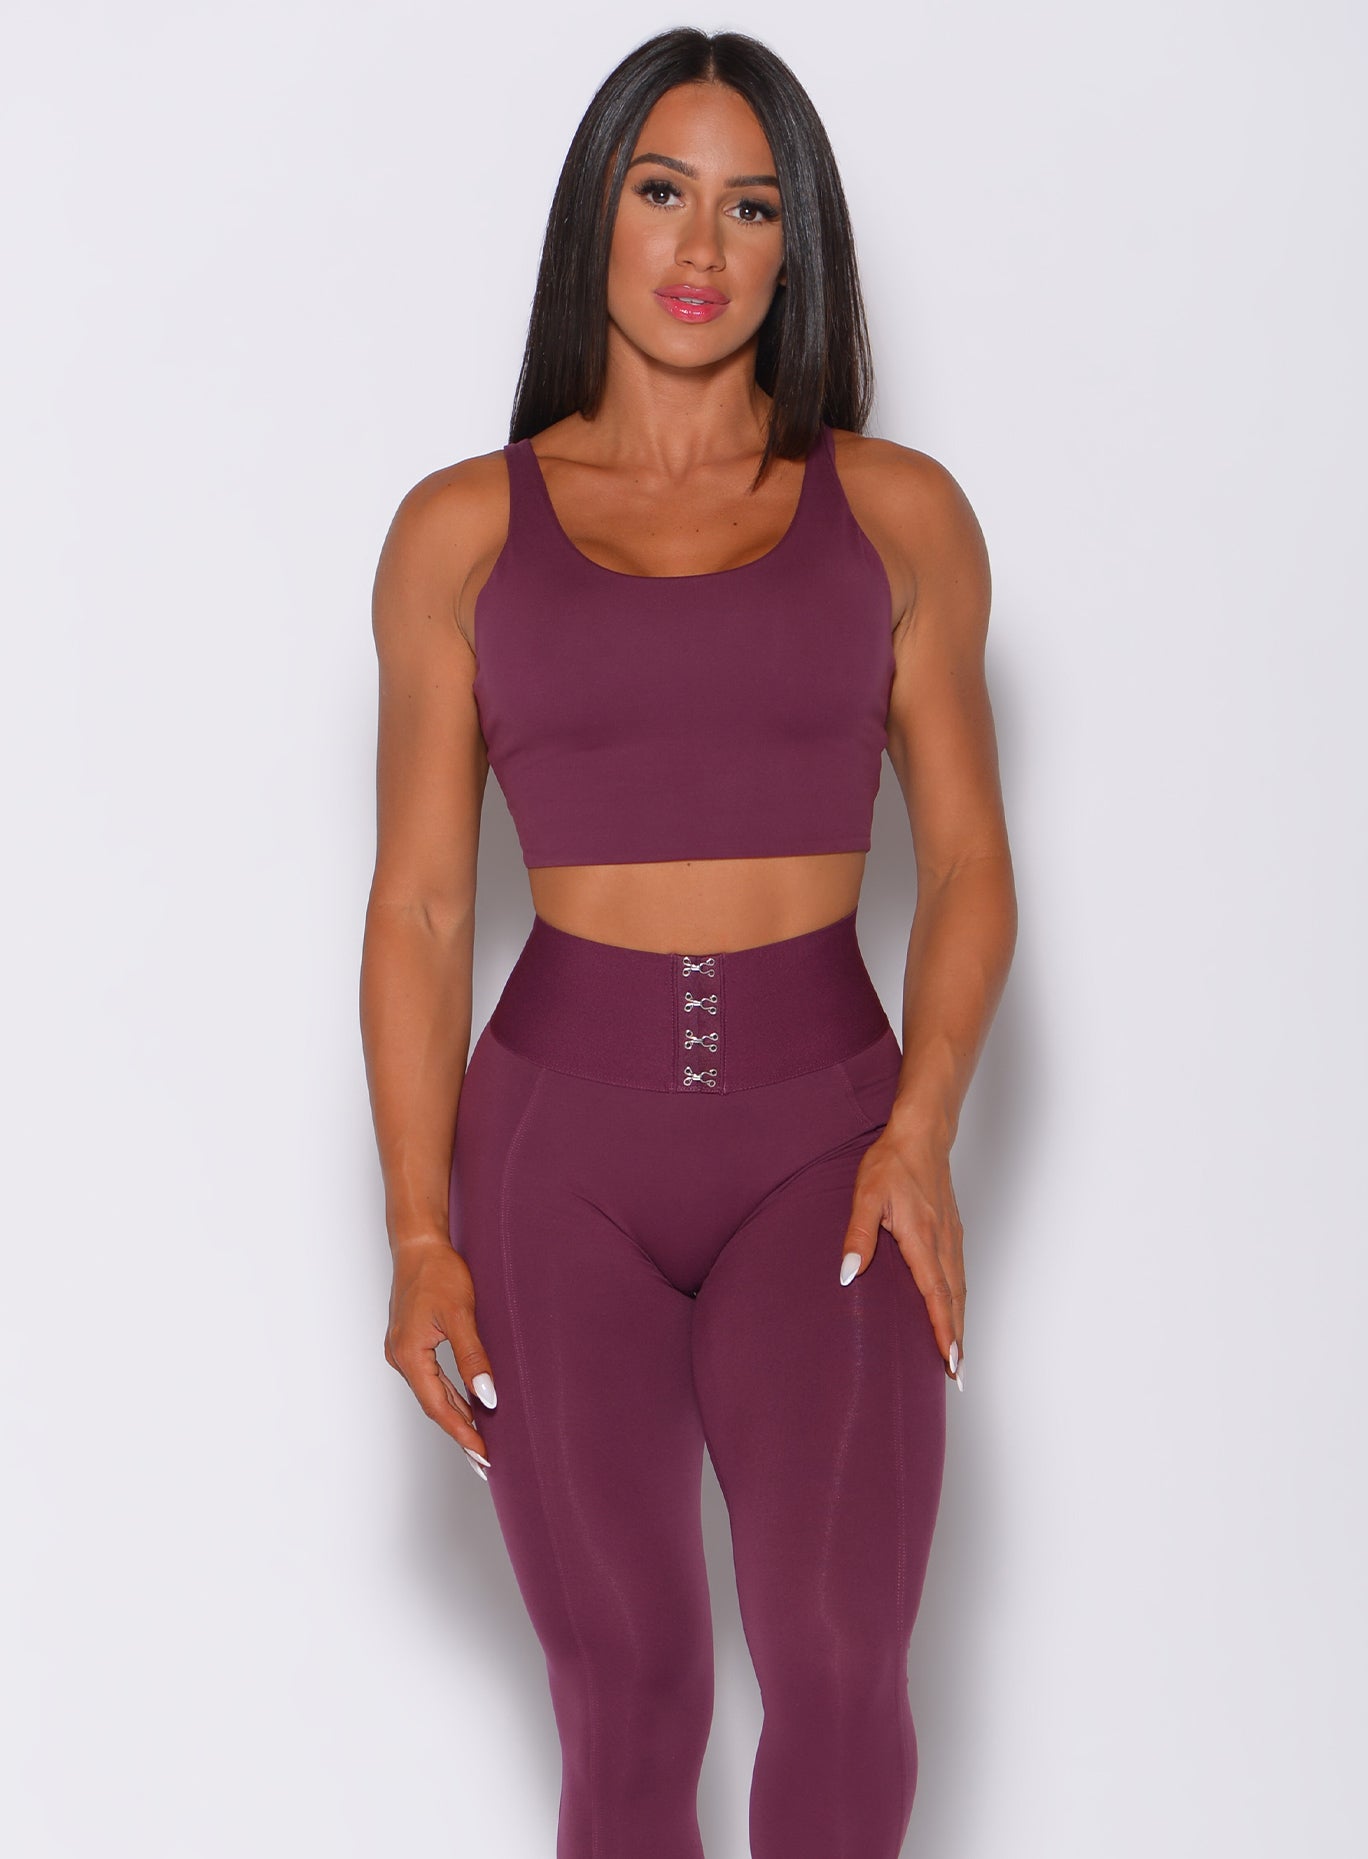 Front profile view of a model wearing our impact sports bra in majestic purple color and a matching leggings